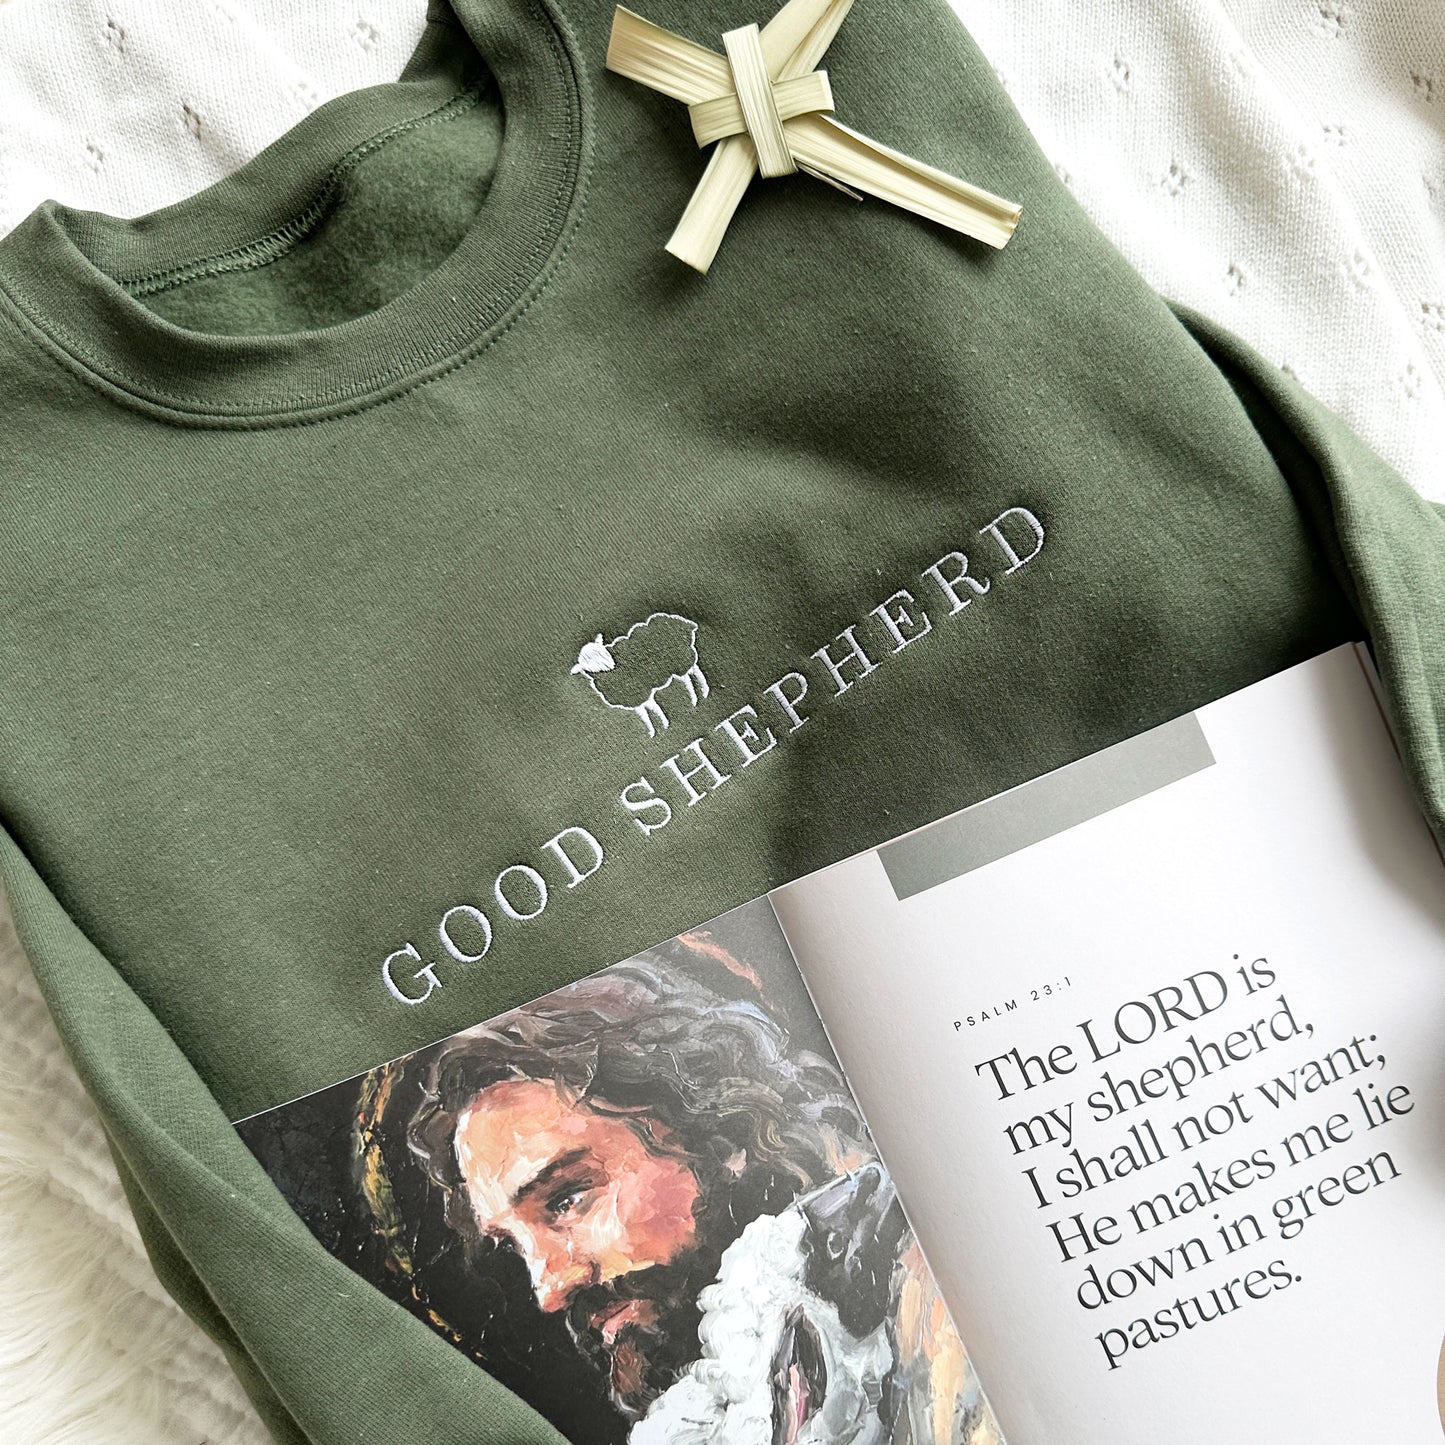 Embroidered sheep and good shepherd across an olive crewneck sweatshirt styled with an open book 